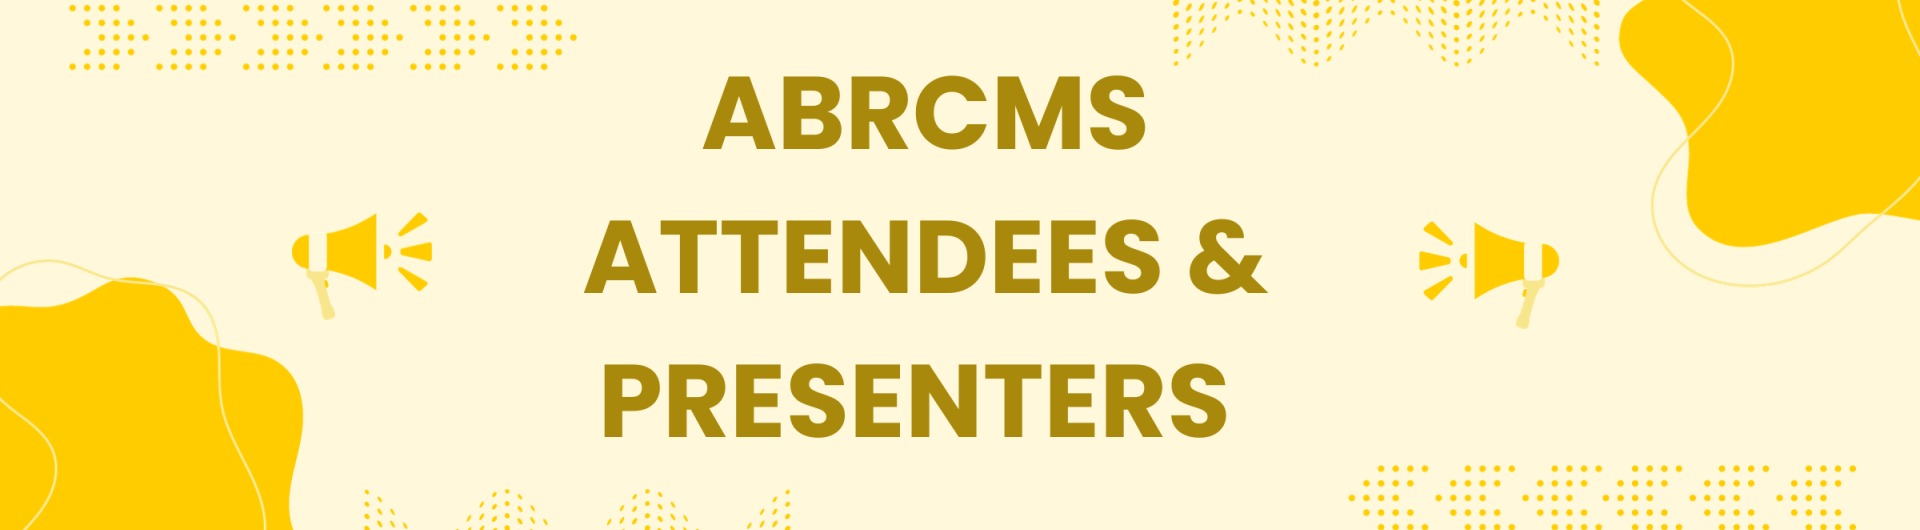 ABRCMS Attendees and Presenters Banner